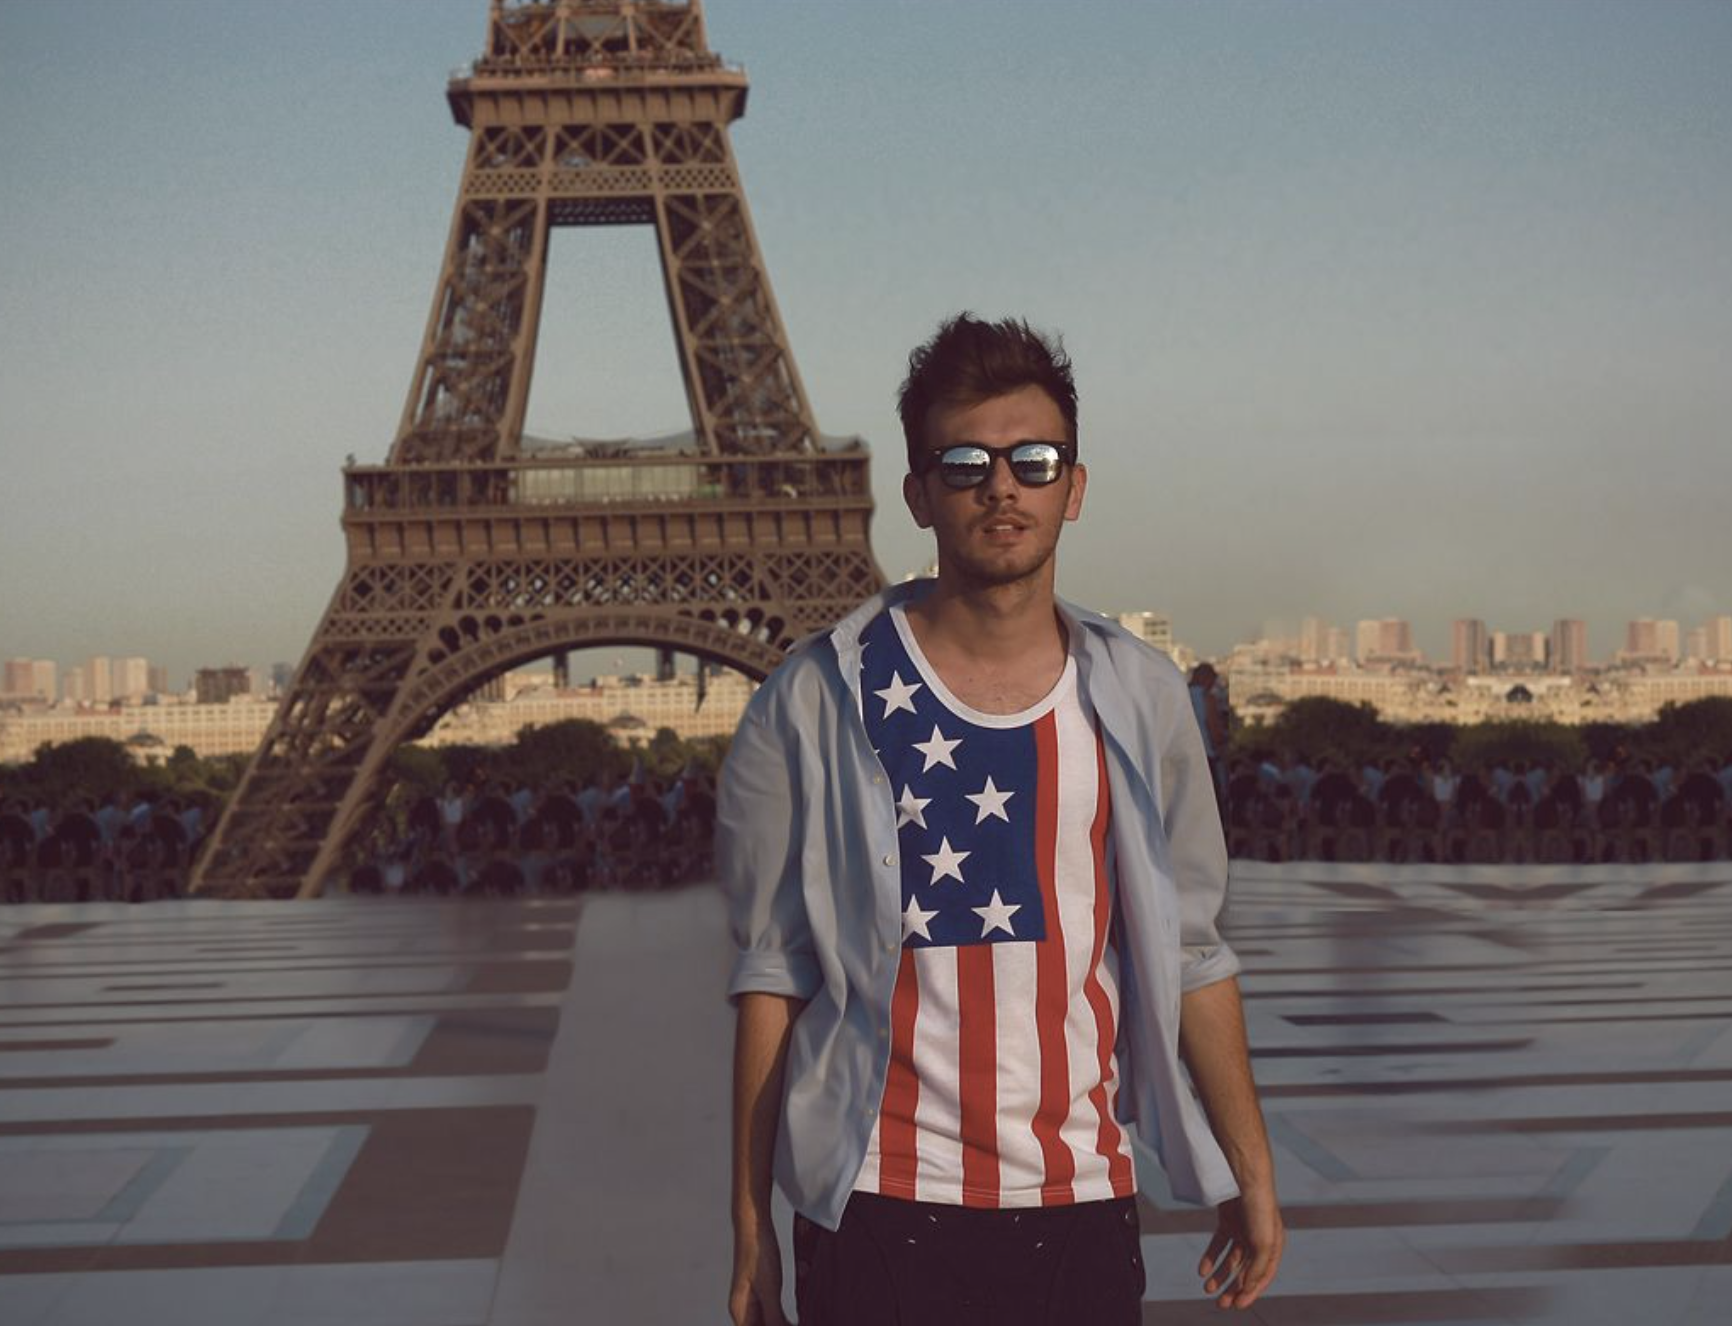 An American white man is wearing sunglasses and a shirt with the American flag in front of the Eiffel Tower